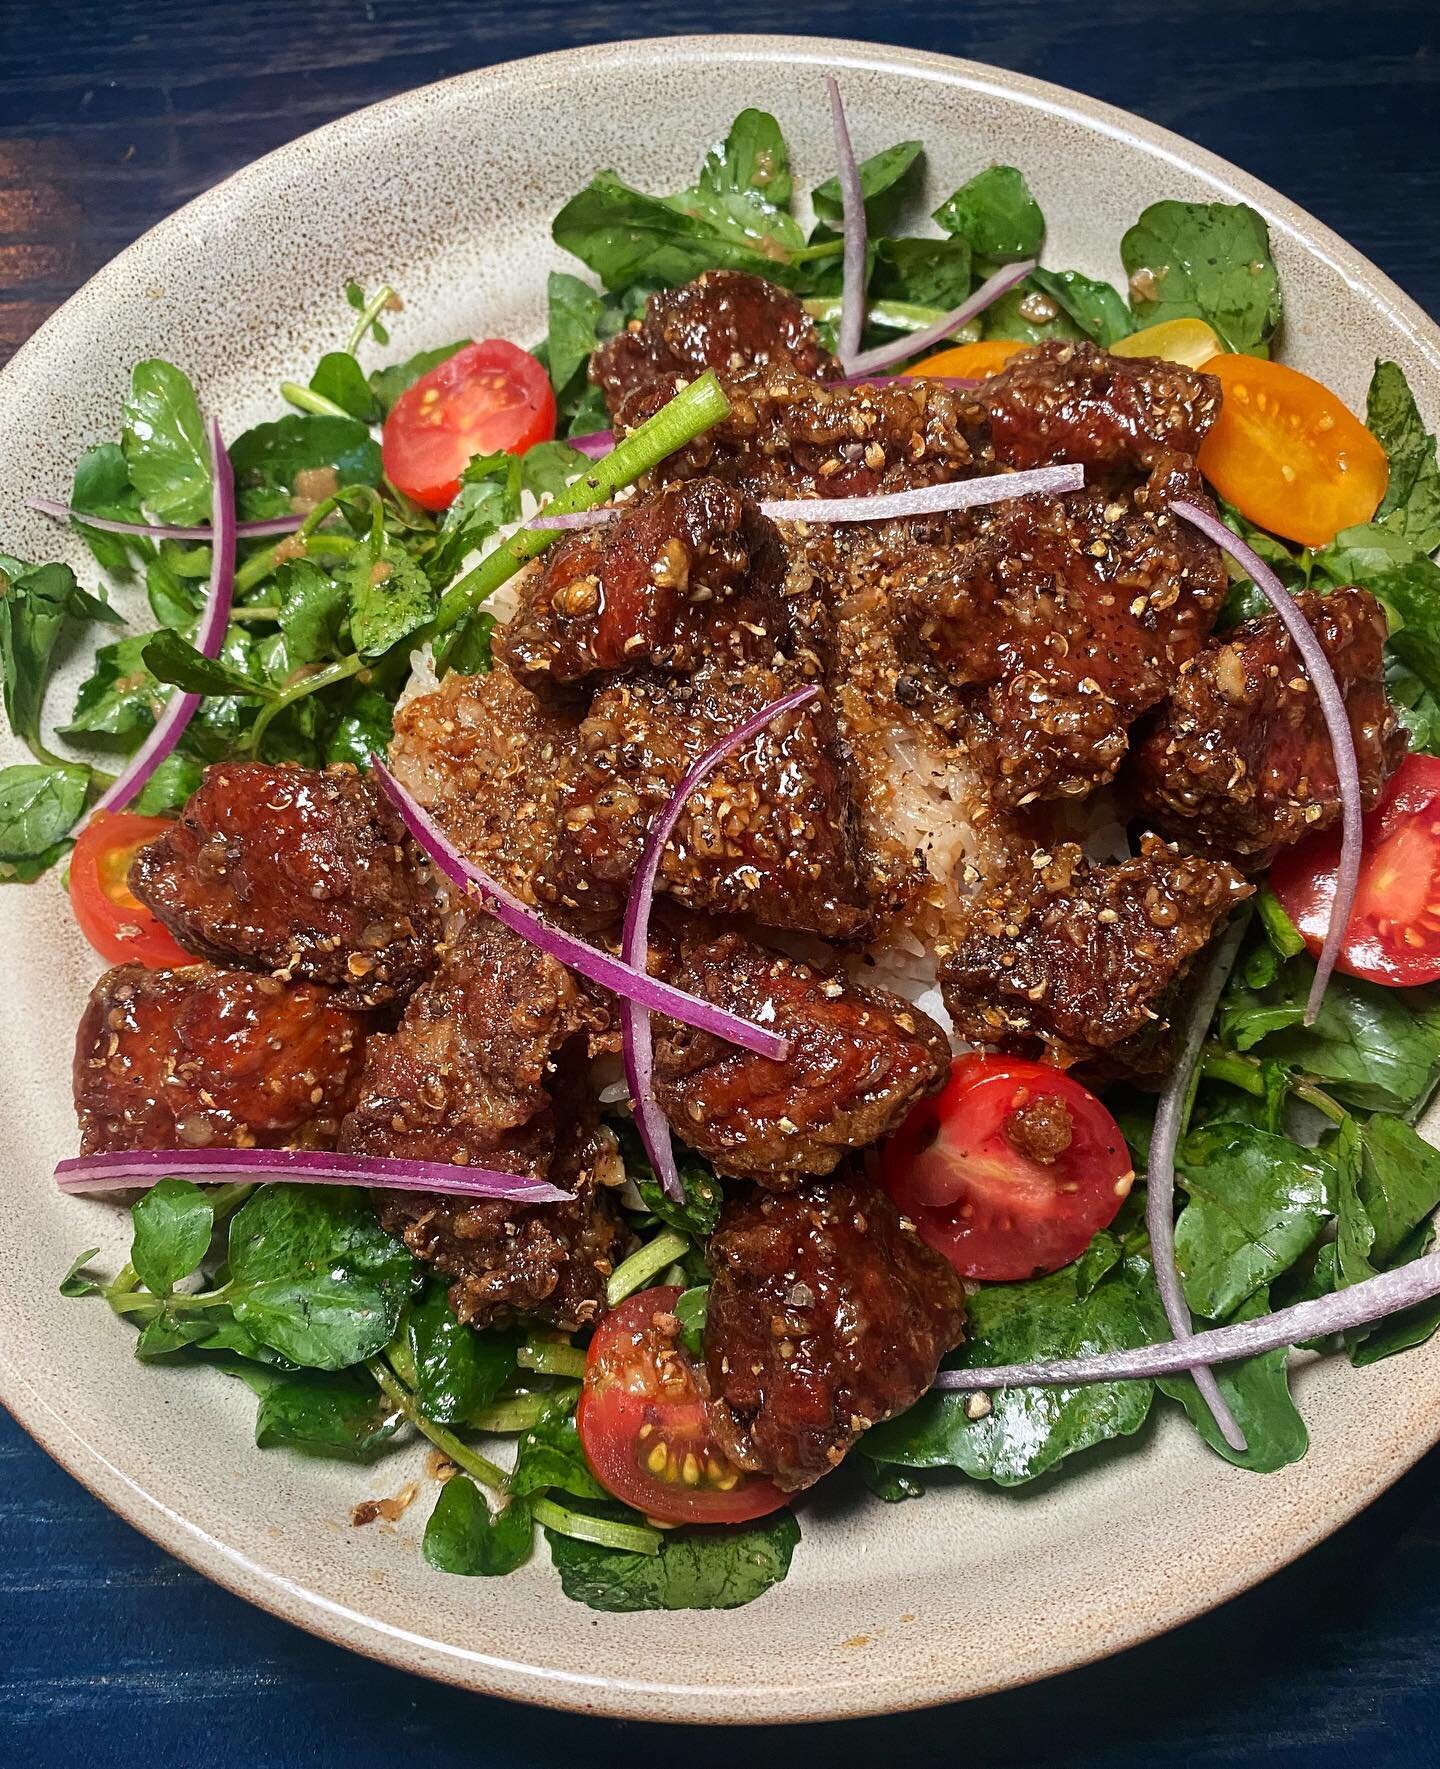 We like our beef shaken, not stirred. B&ograve; l&uacute;c lắc is a favorite classic served with watercress tomato salad.
.
.
.
.
#madamevobbq #dinner #lunch #foodandcuisines #eatingnewyork #nycft #eatupnyc #buzzfeast #sogood #tryitordiet #hypebeast 